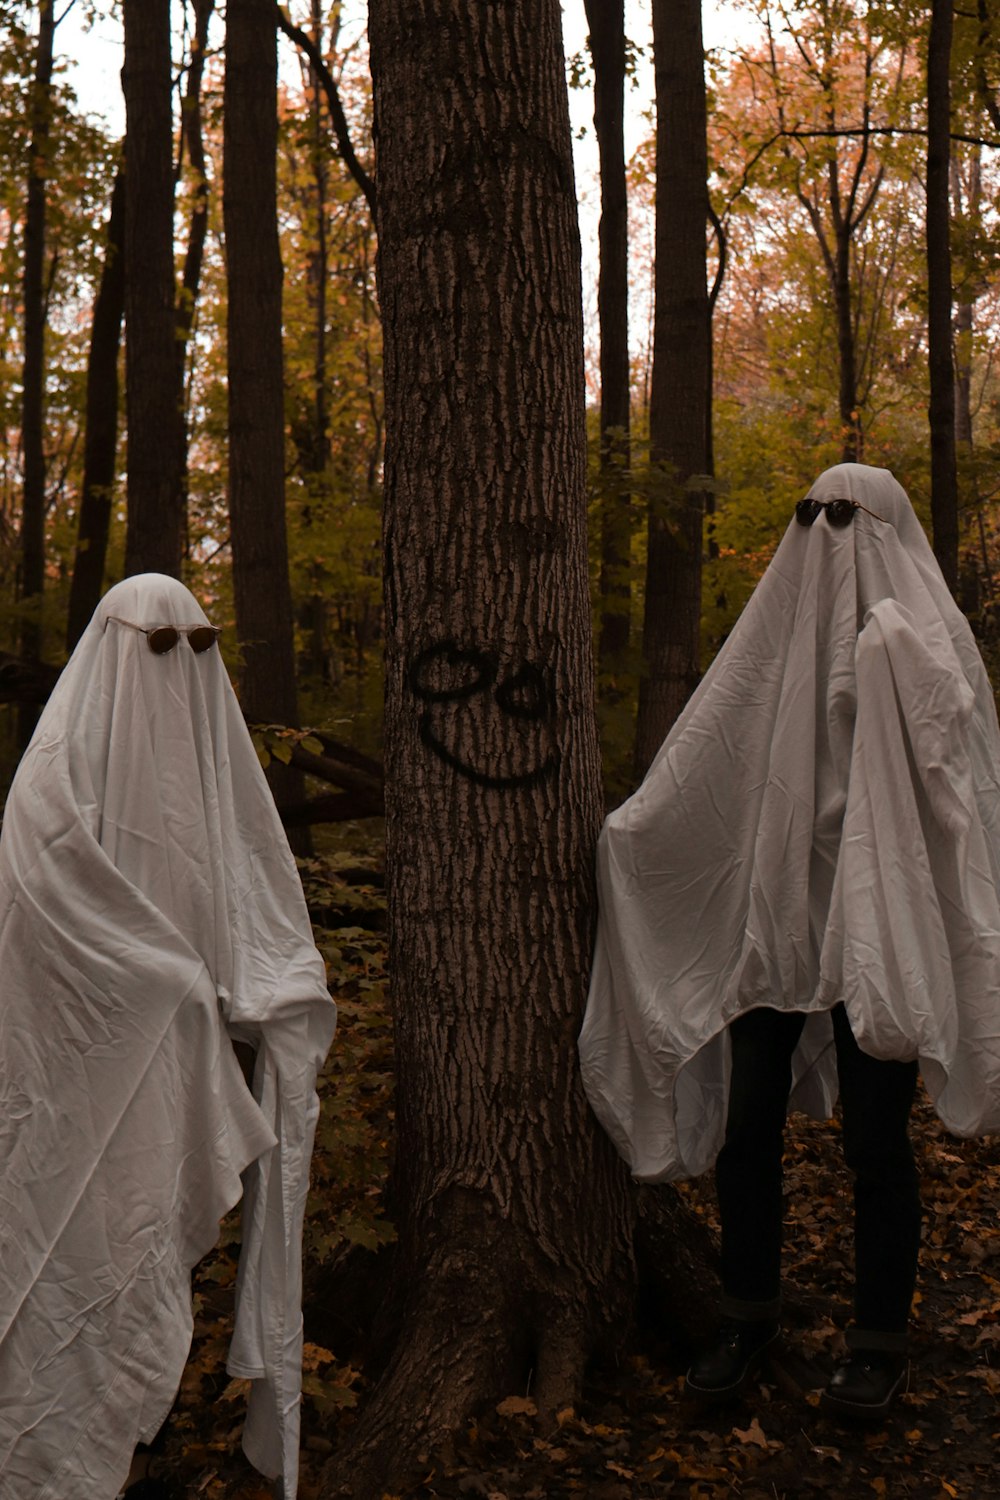 two people in white ghost costumes standing next to a tree